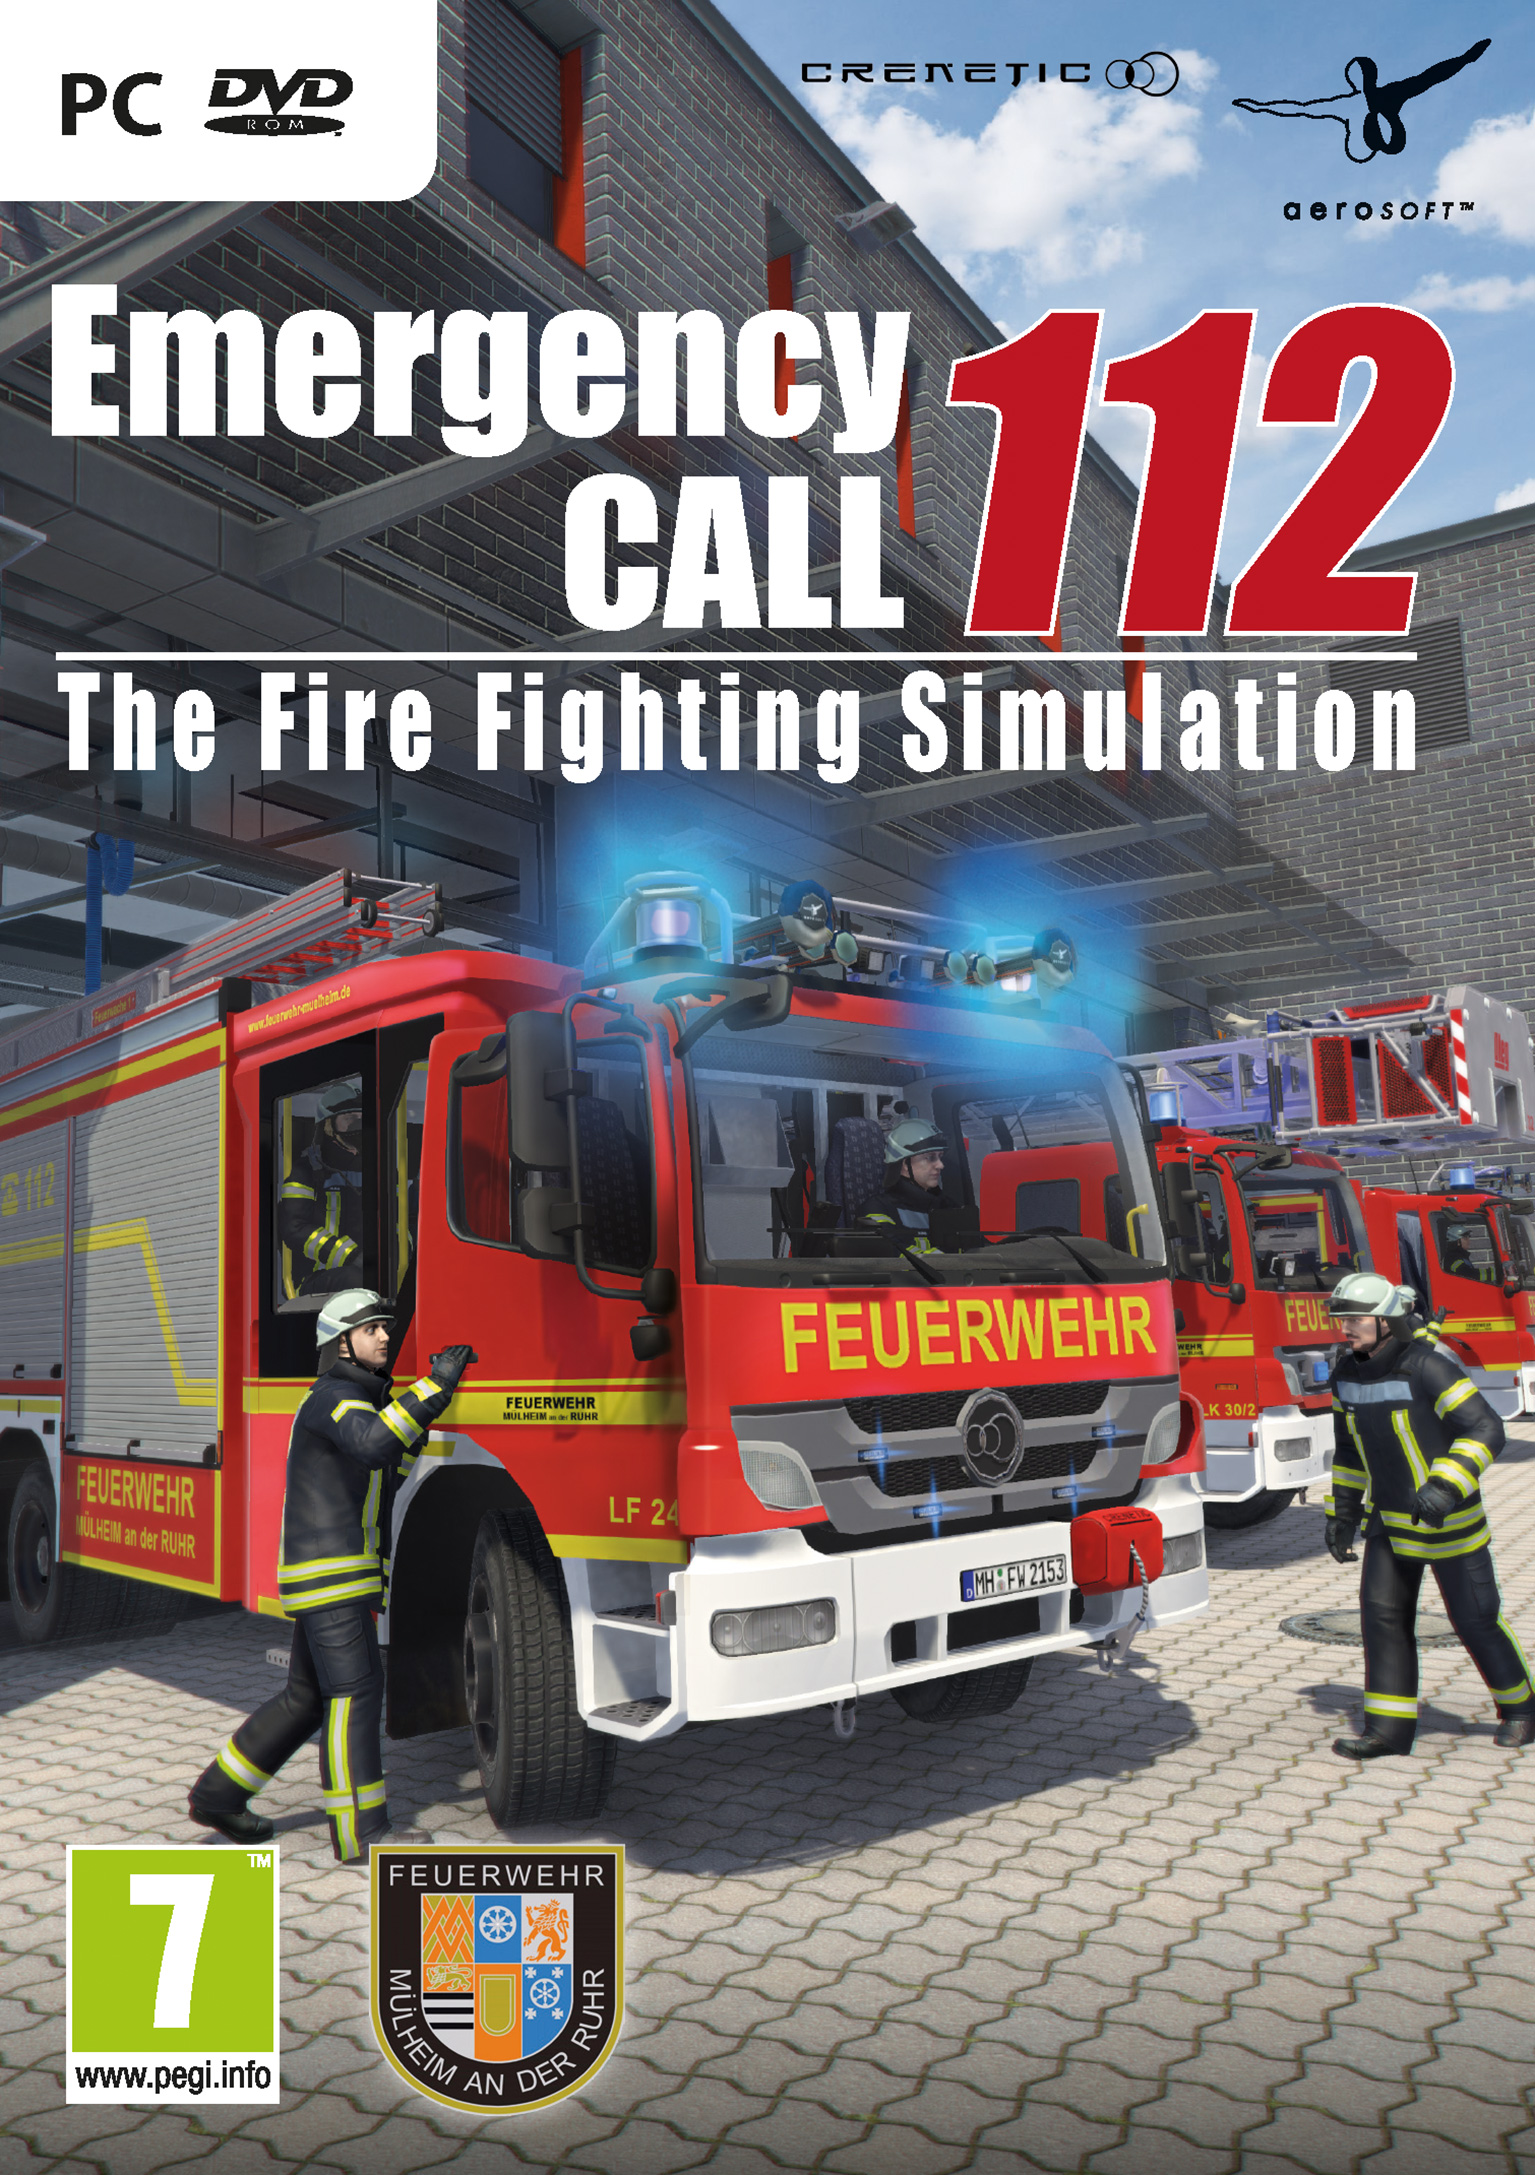 Emergency Call 112 - The Fire Fighting Simulation - pedn DVD obal